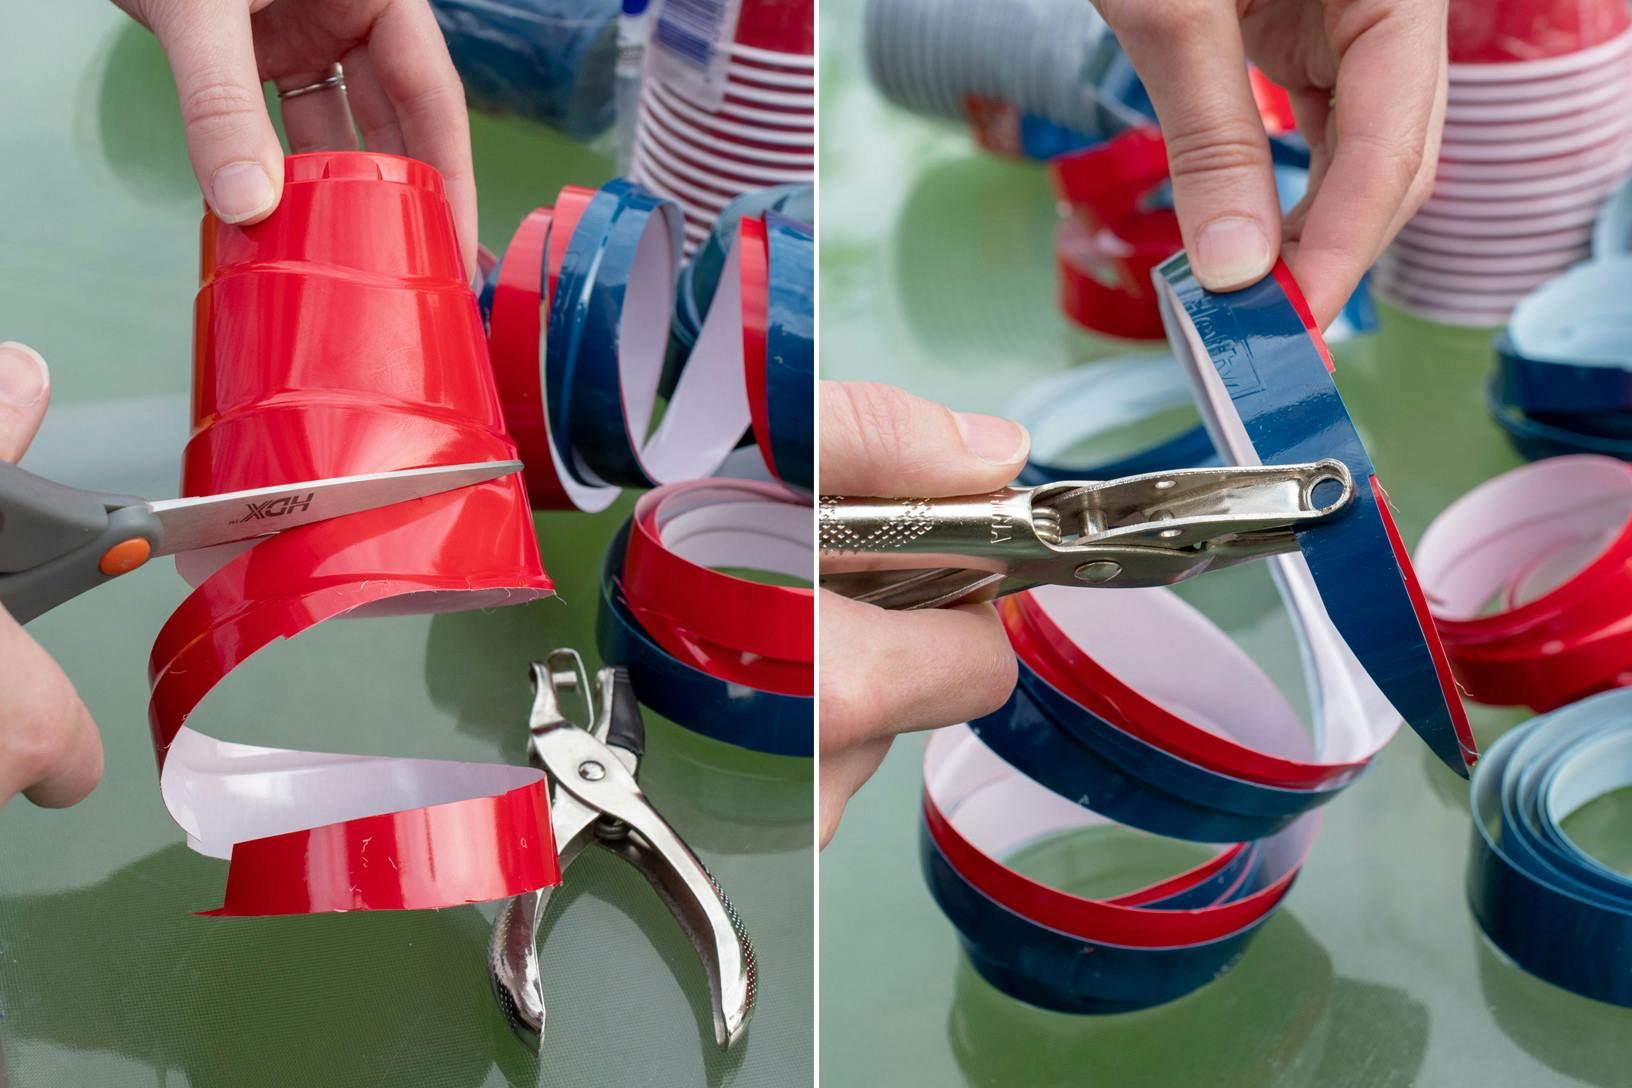 A person's hand cutting a red plastic cup in a spiral pattern to make twirly streamers, and punching a hole through the end to string multiple together.